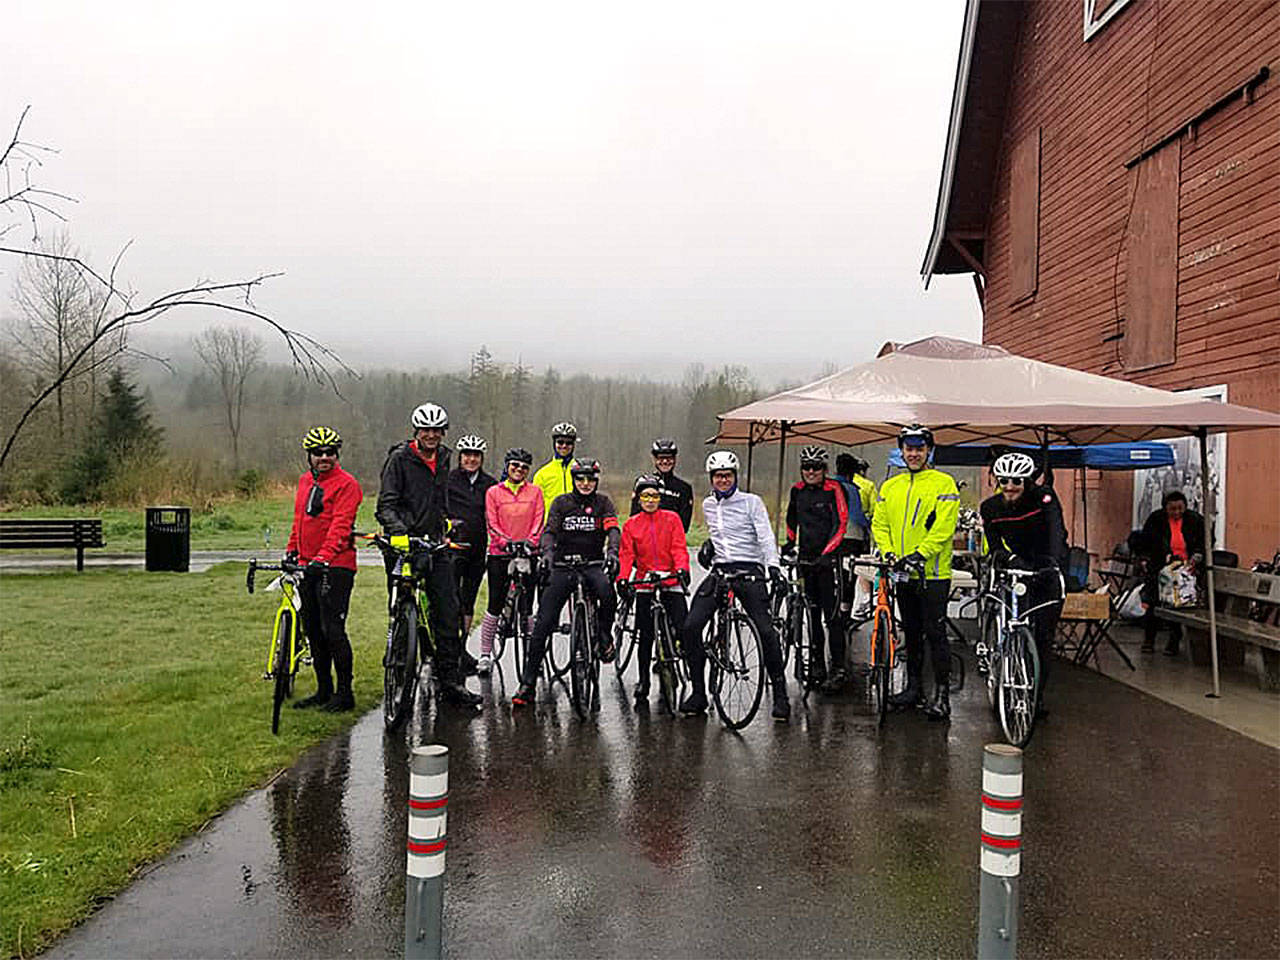 Riders get ready to brave rainy weather for the Dr. Art Grossman Memorial Bike Ride, held April 14 on the Centennial Trail. (Contributed photo)